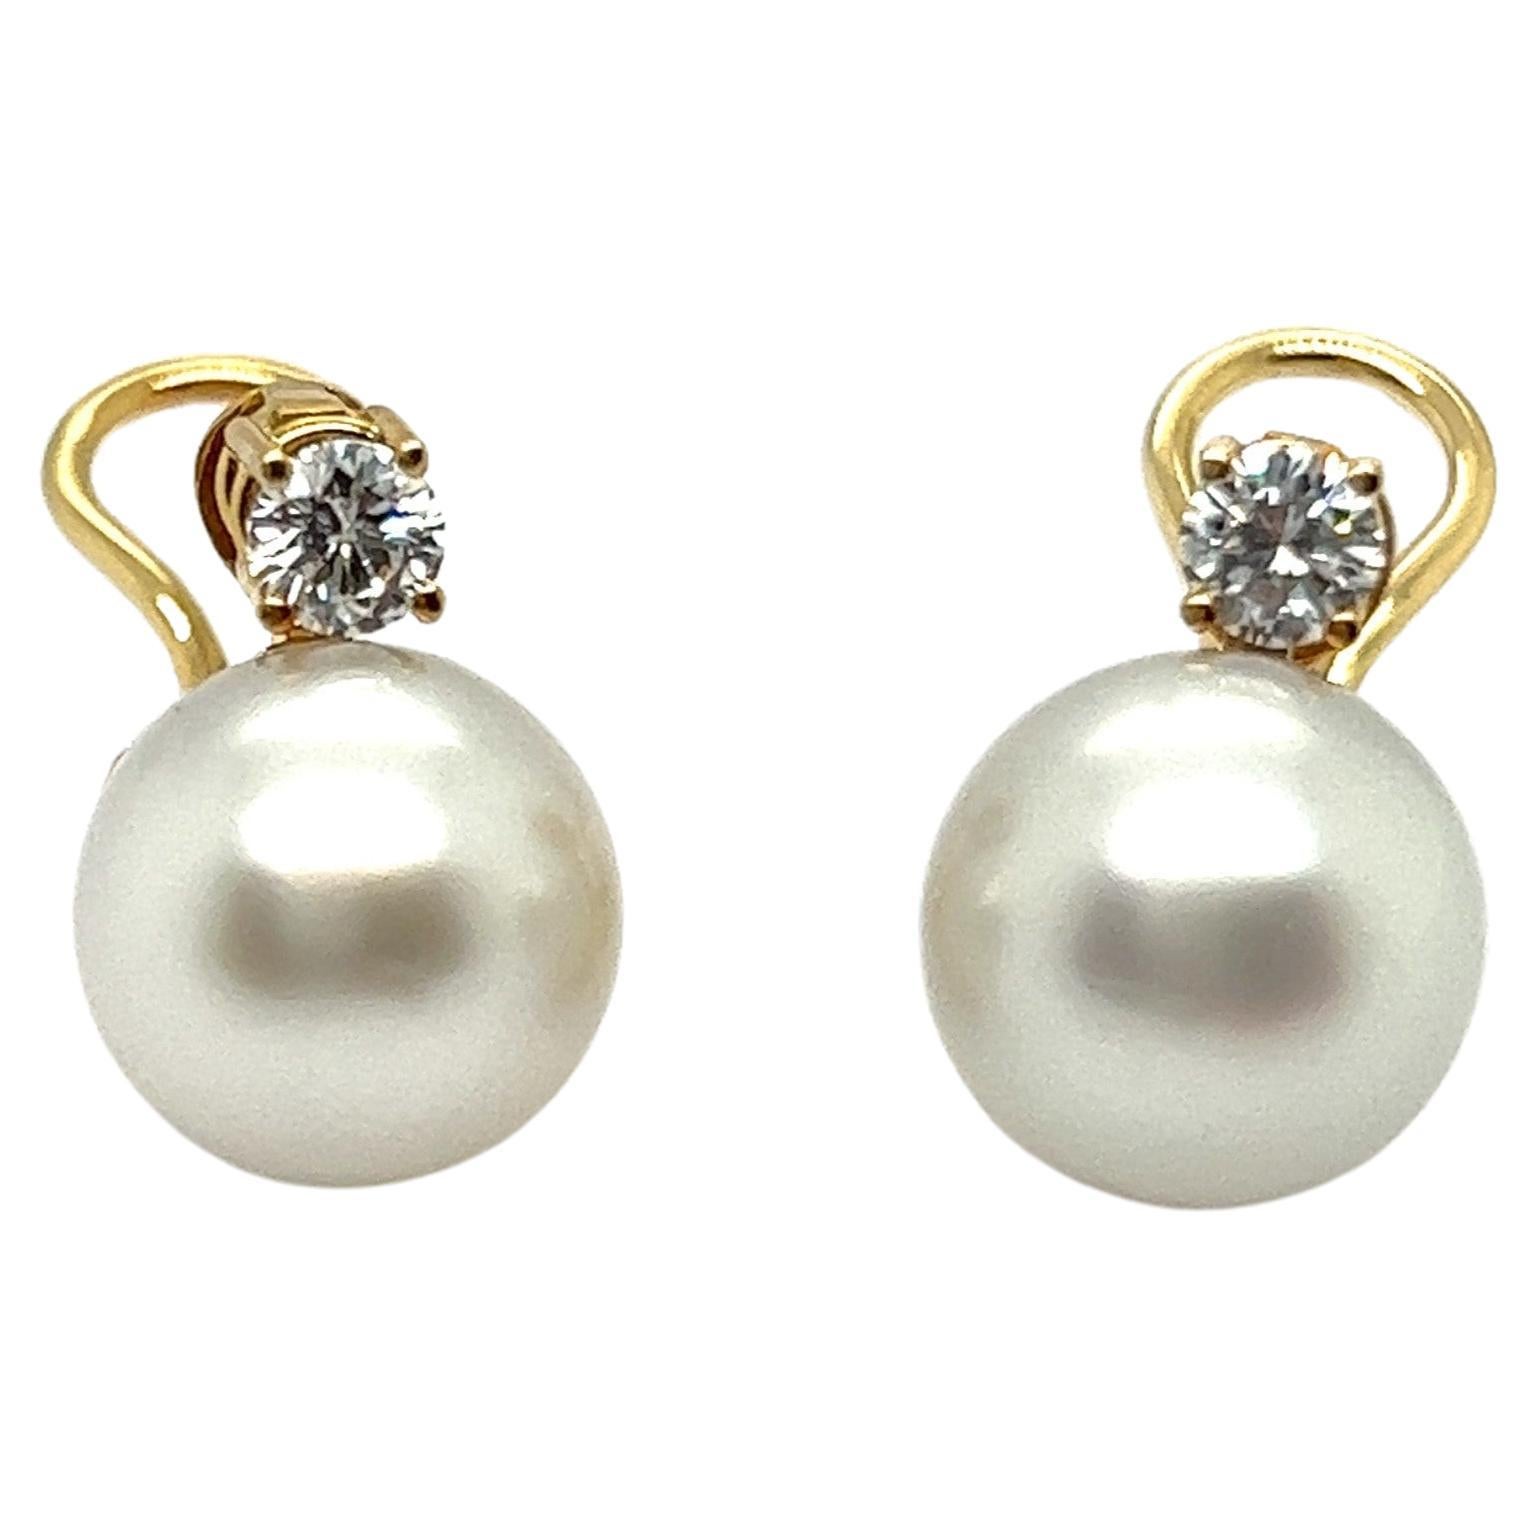 Explore the elegance of these classic ear clips with pearls and diamonds in 18 Karat yellow gold.

Capturing the spotlight are two round cultured South Sea pearls, evoking the delicacy of dewdrops in a lavish white hue. Paired alongside are two